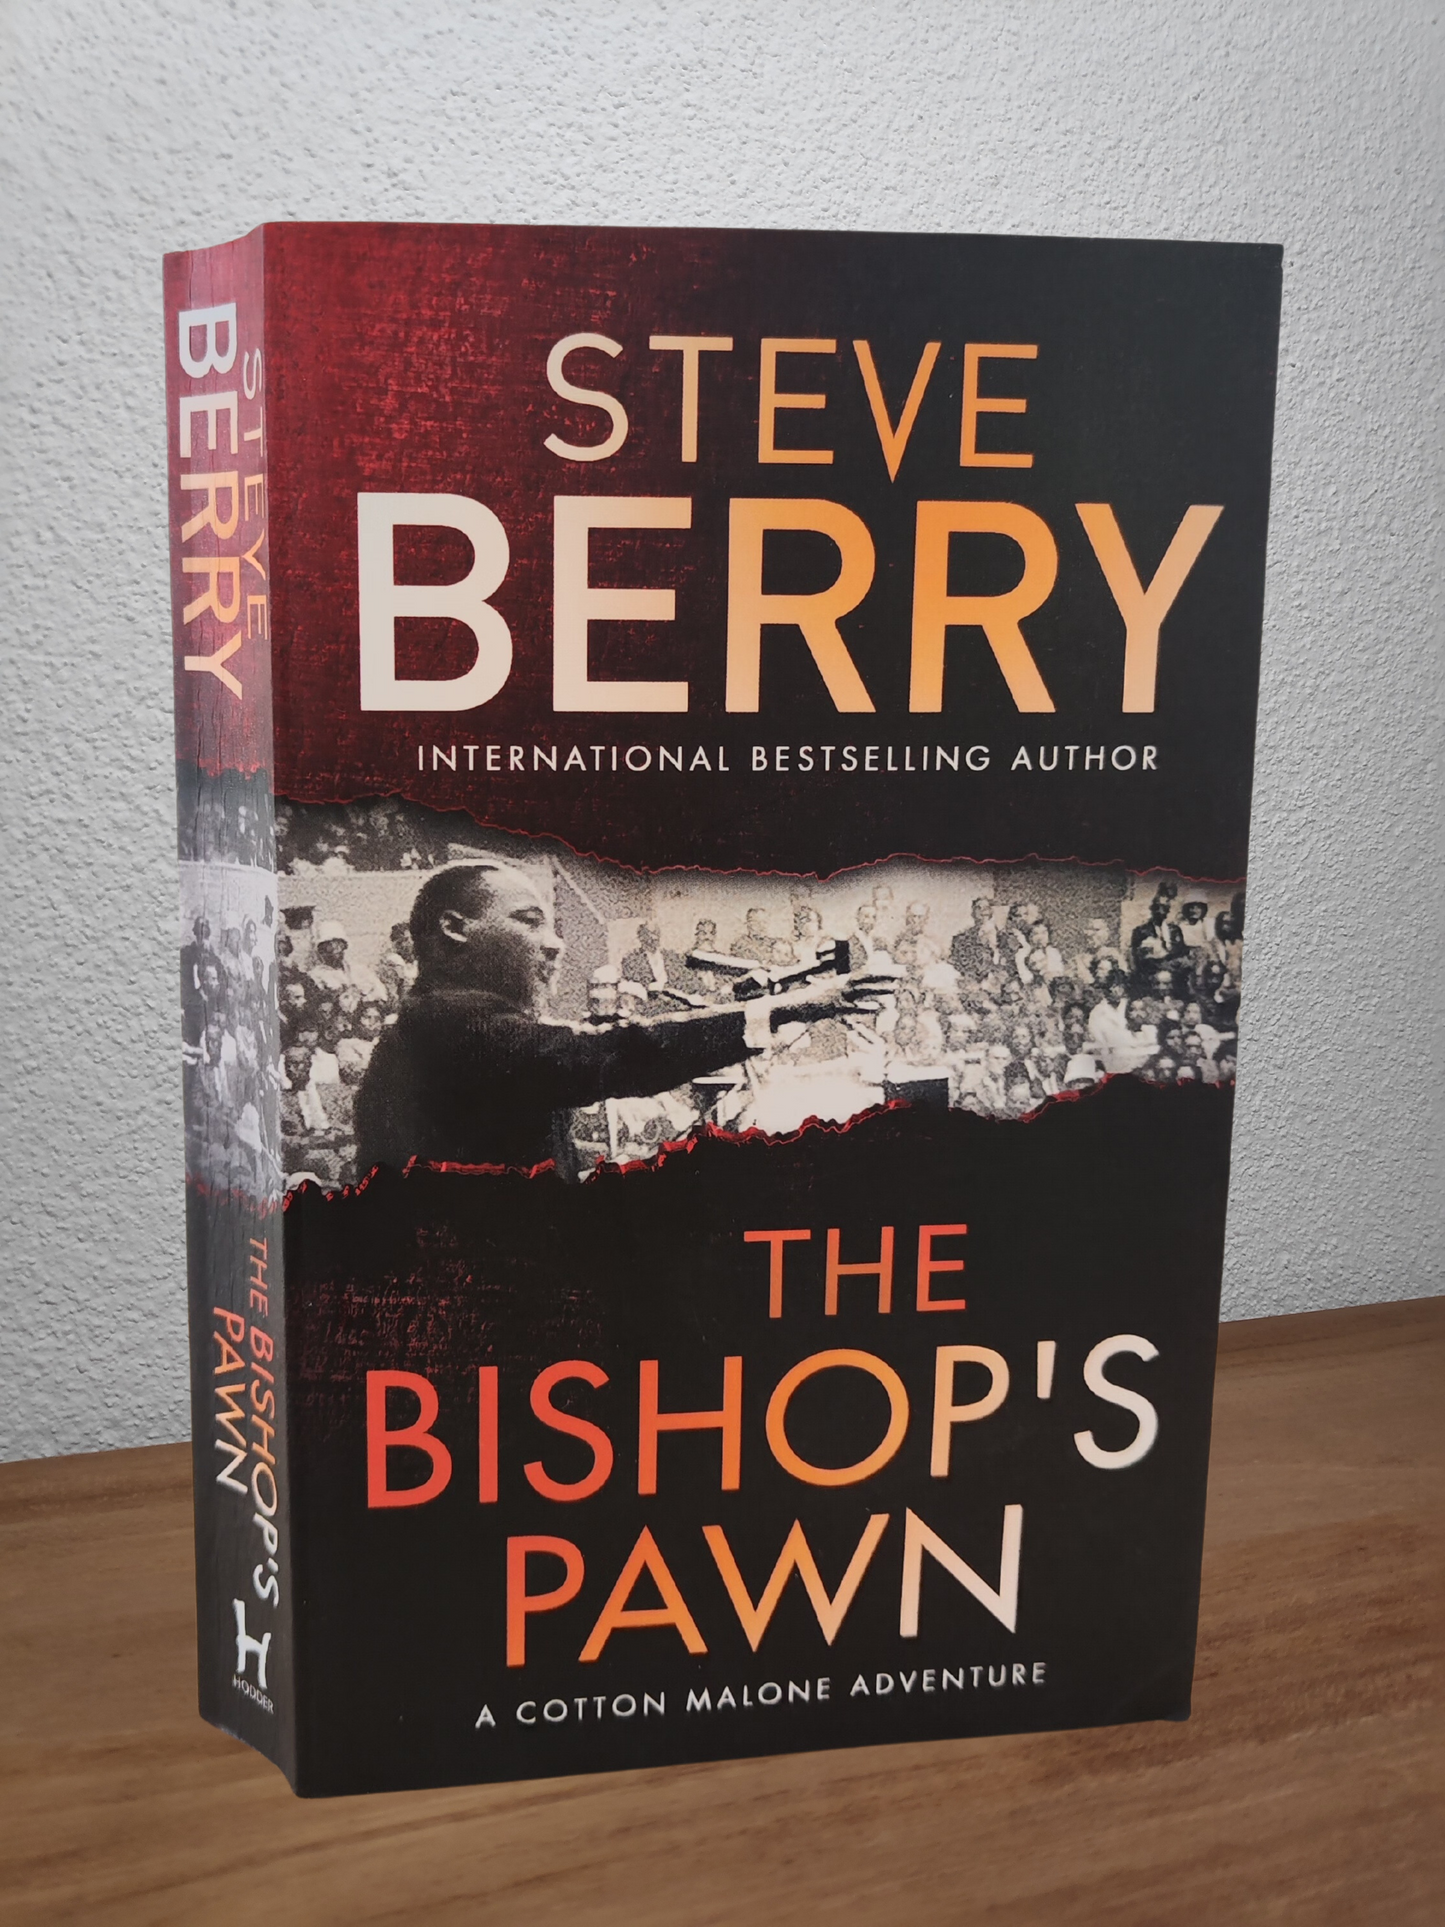 Steve Berry - The Bishop's Pawn (Cotton Malone #13)